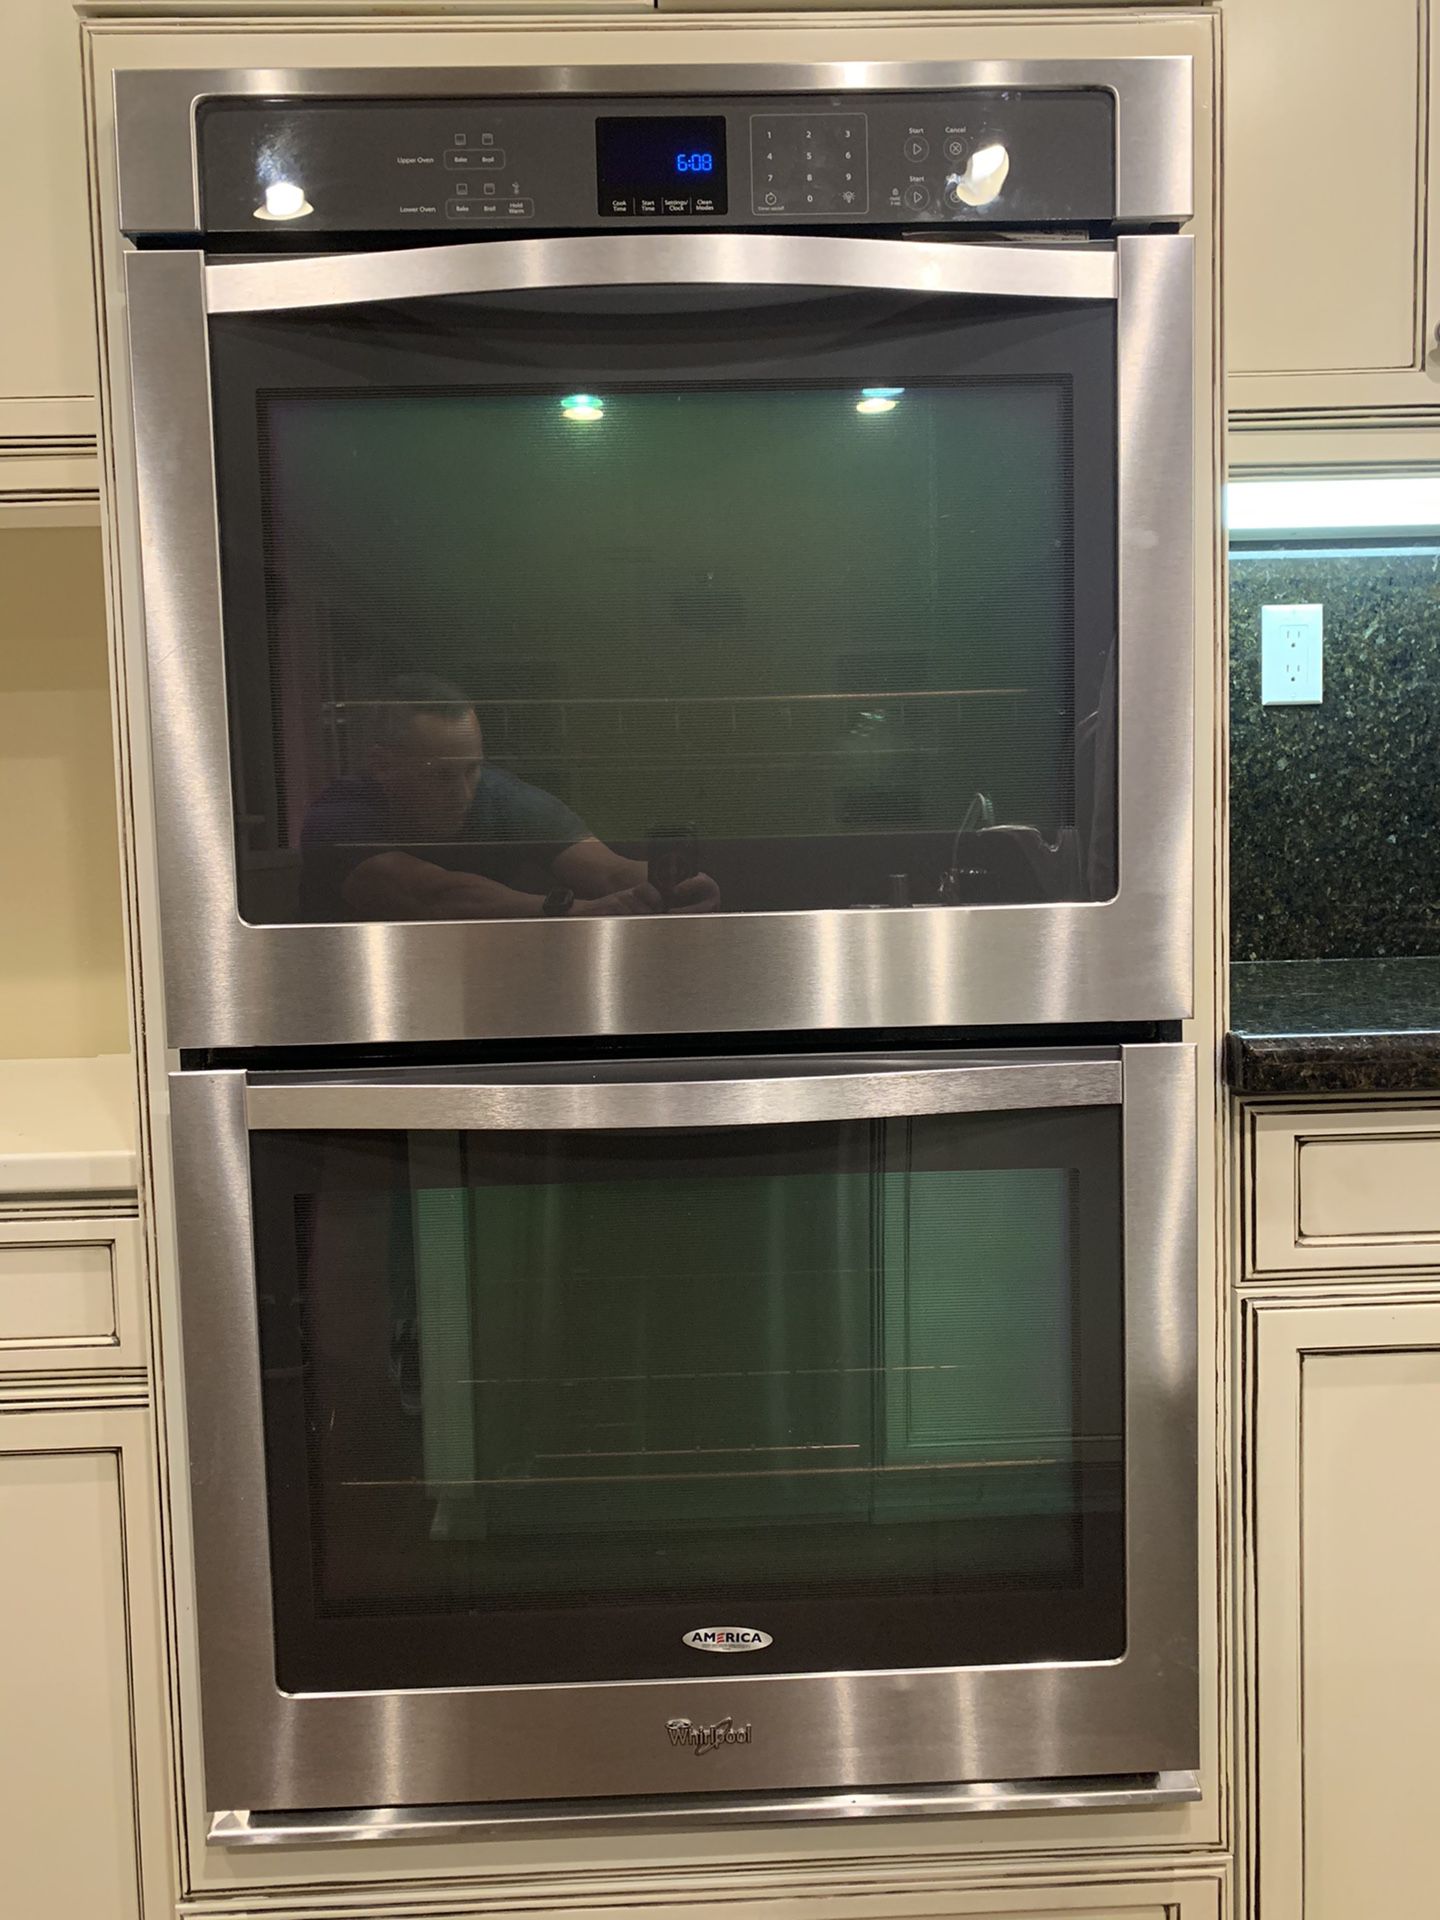 Whirlpool double oven, 36” stovetop (hood included) and matching dishwasher. All stainless steel and in amazing condition.